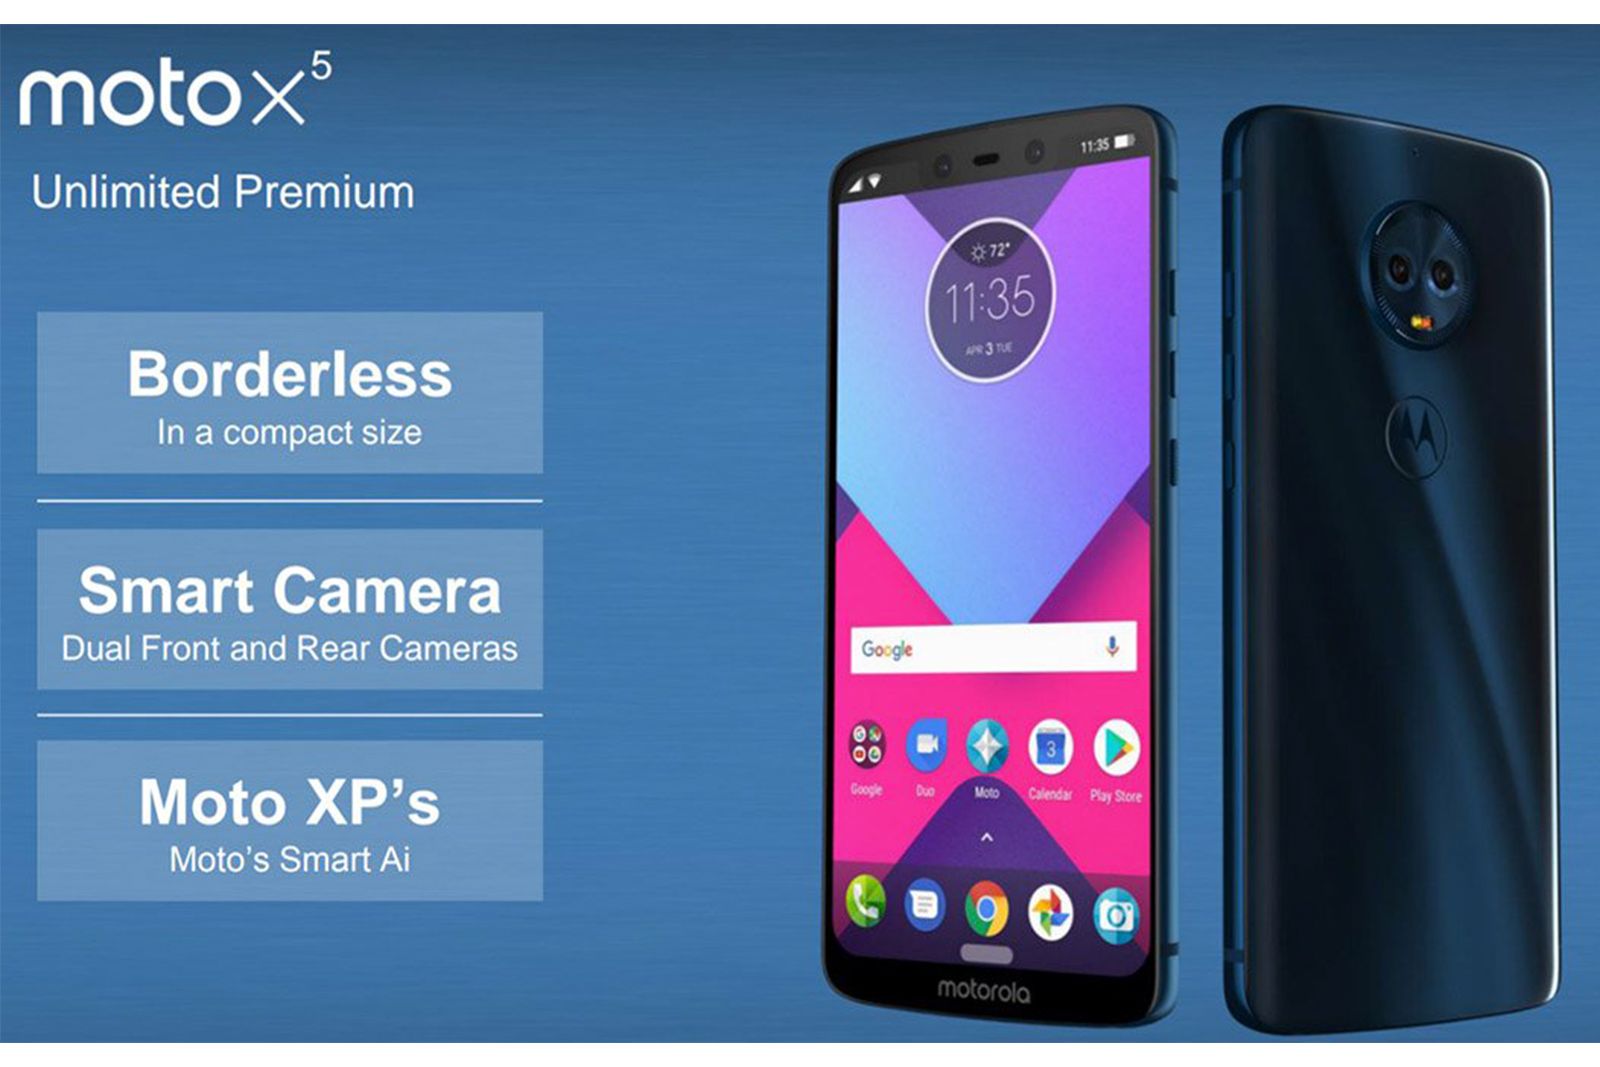 Moto X5 news rumours and release date everything you need to know image 1